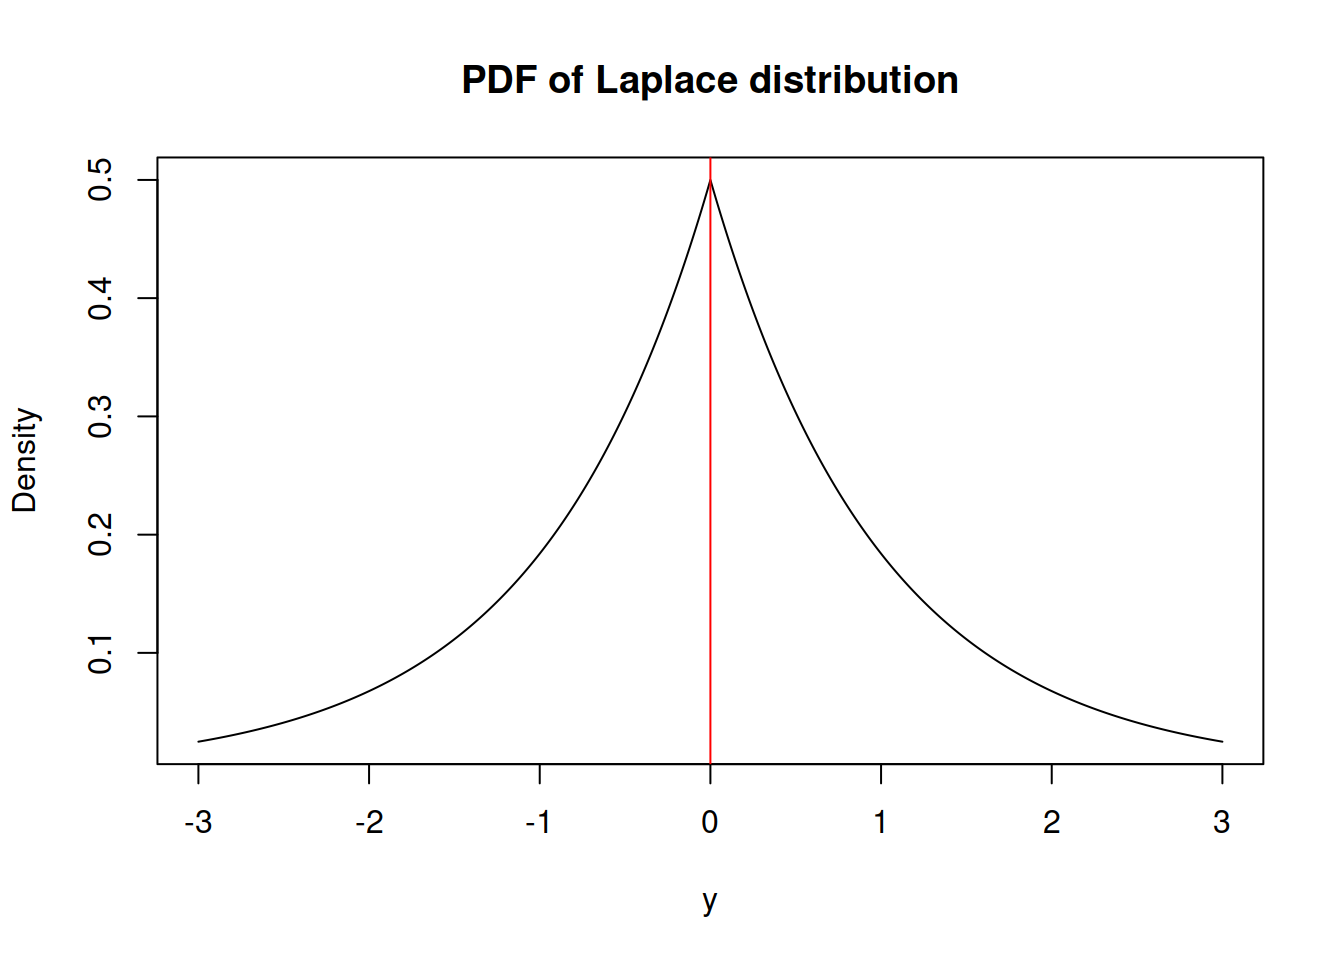 Probability Density Function of Laplace distribution